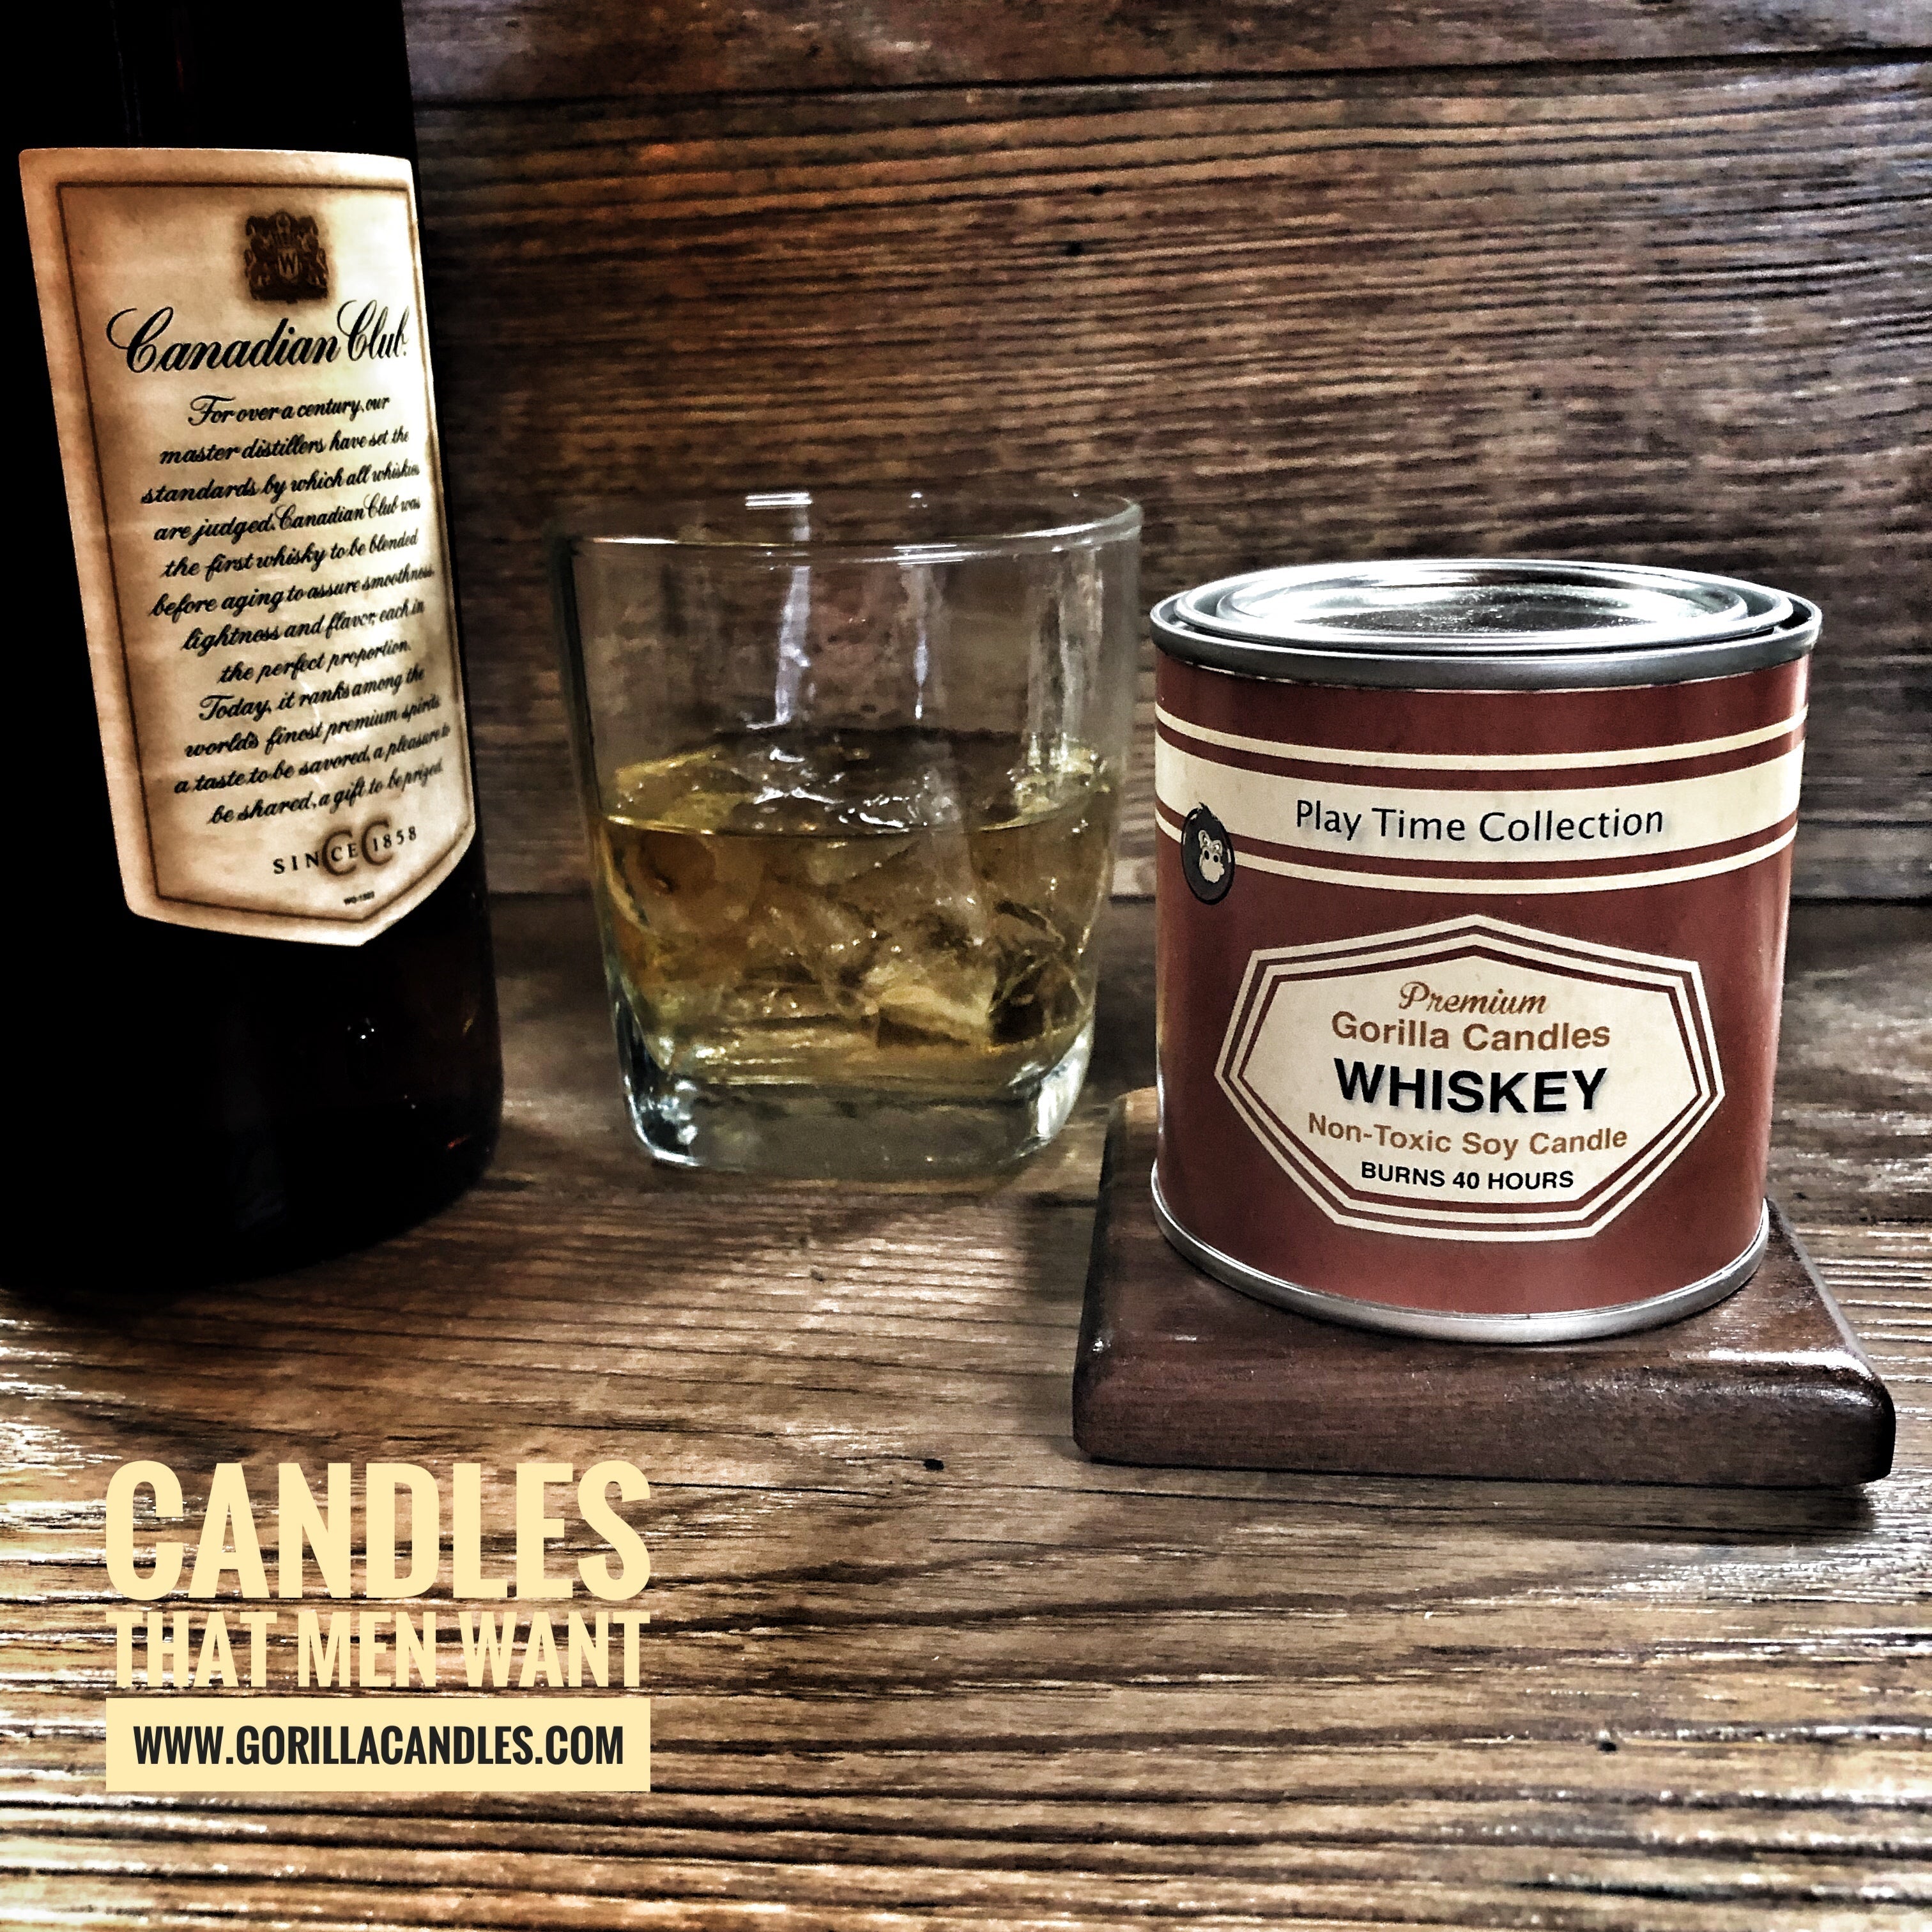 Whiskey by Gorilla Candles™